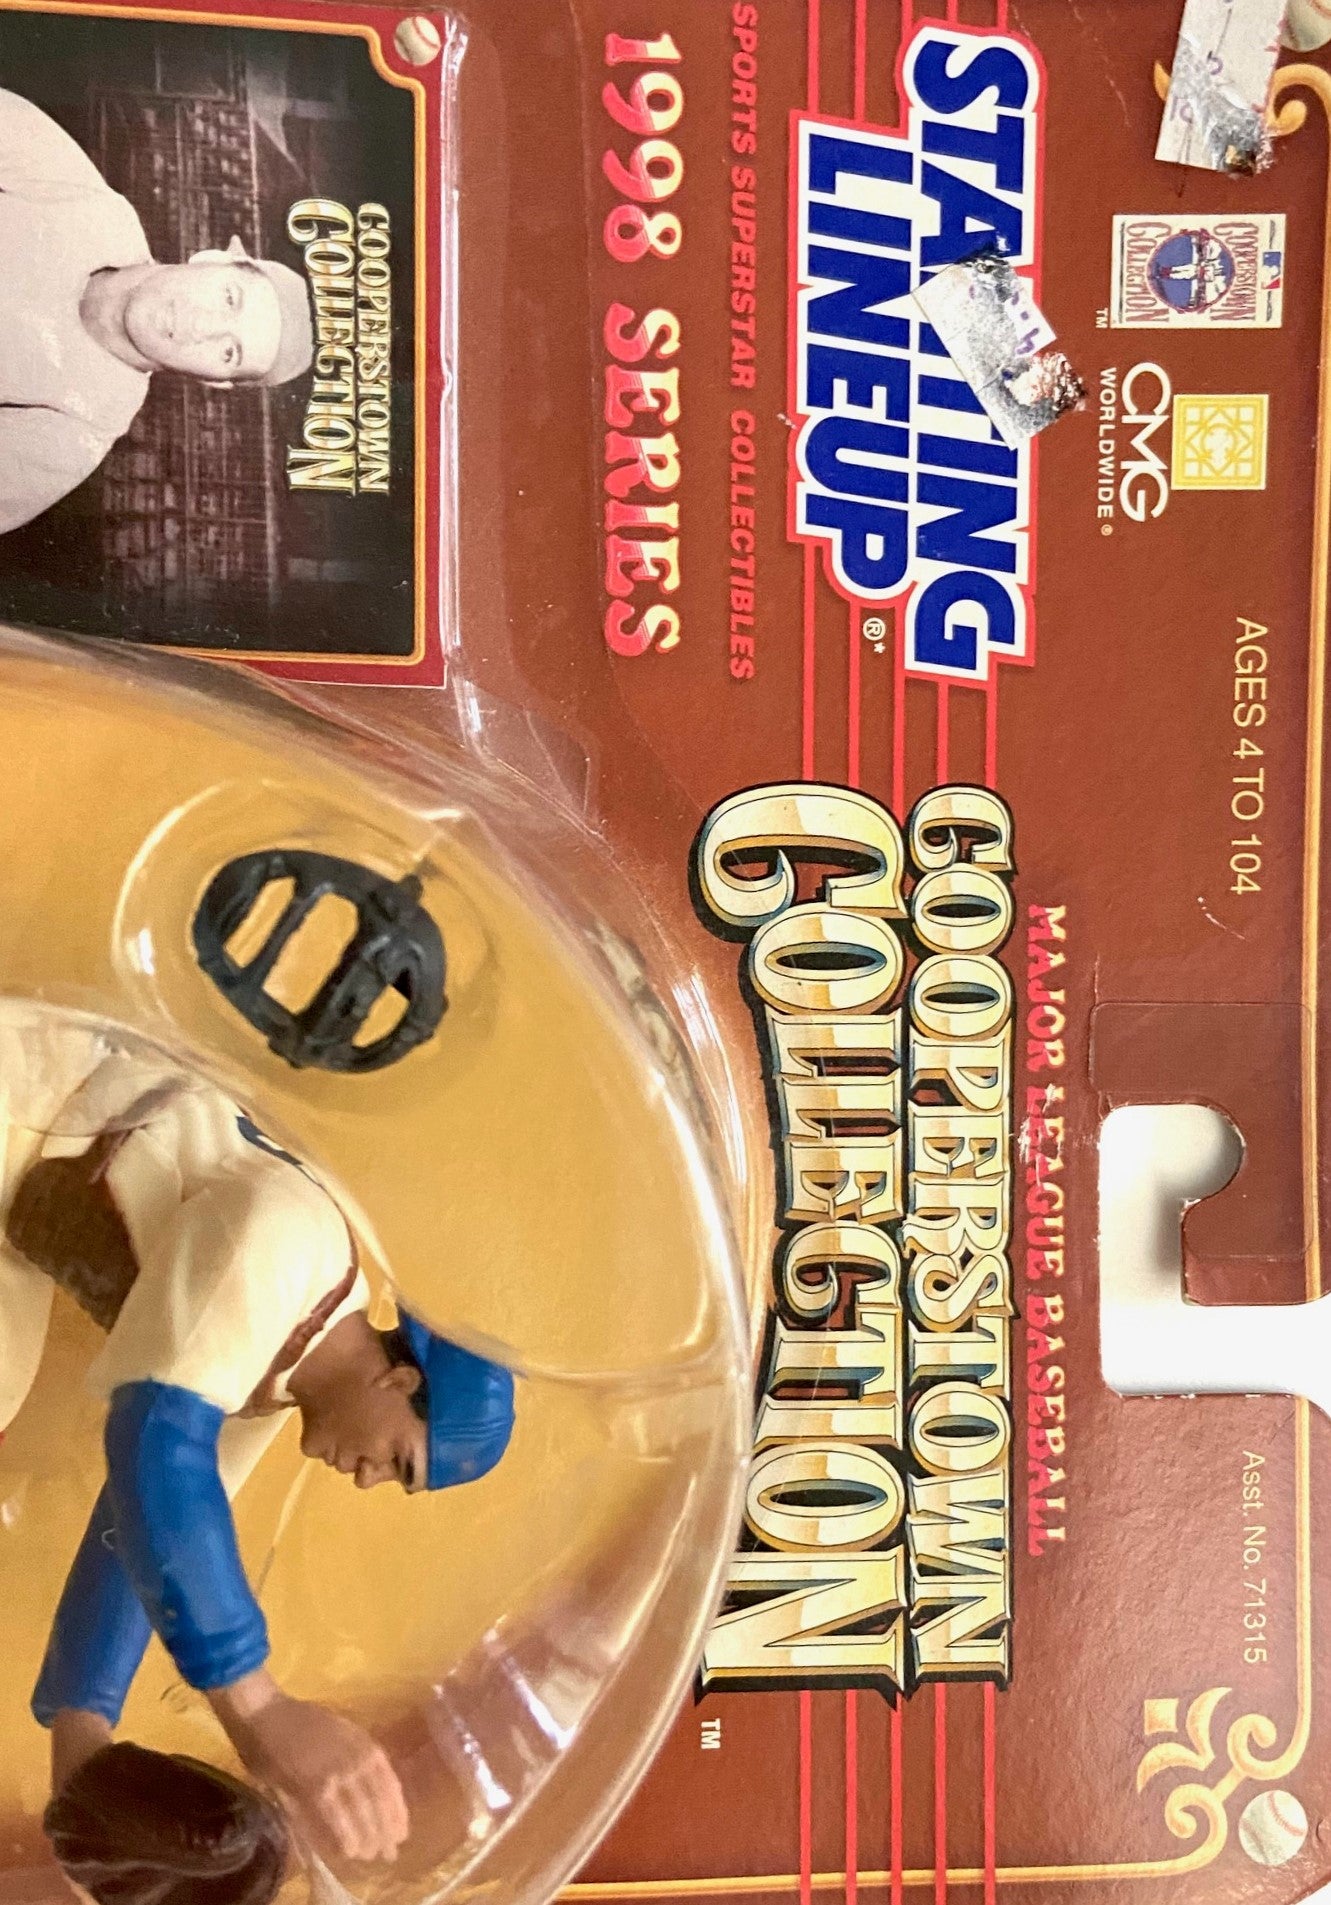 Roy Campanella 1998 Cooperstown Collection Starting Lineup MLB Figurine (New) by Kenner